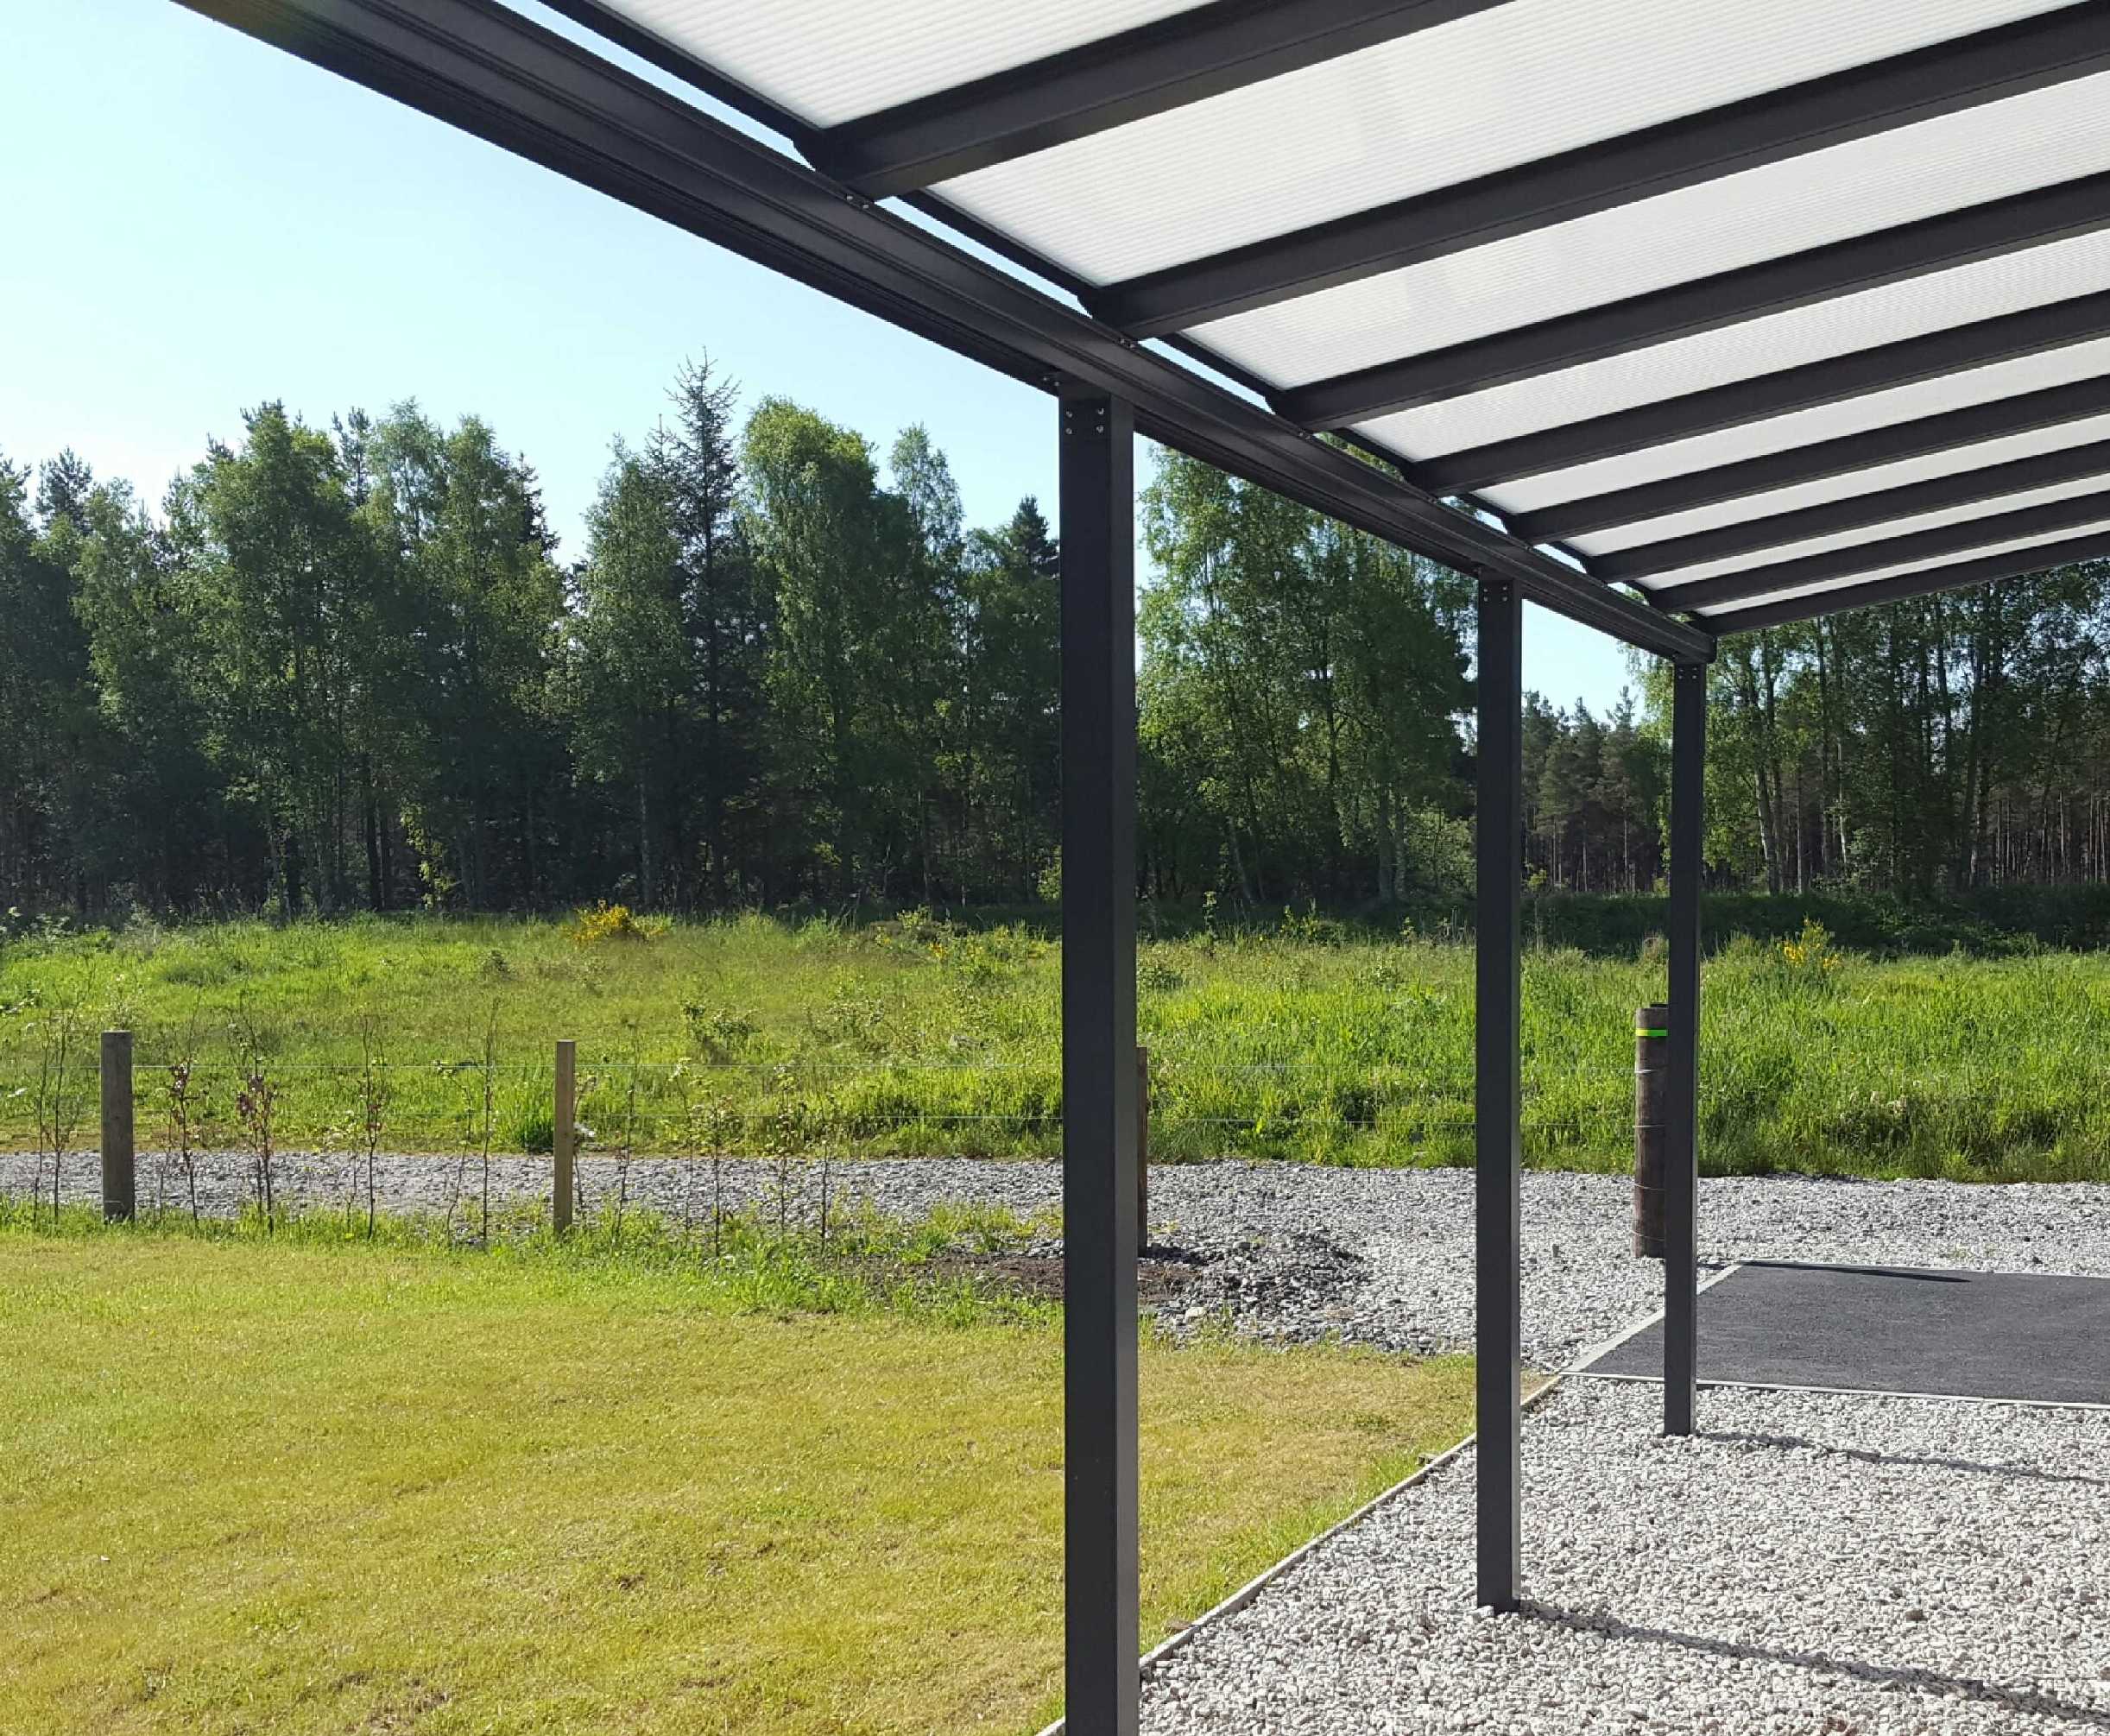 Omega Smart Lean-To Canopy, Anthracite Grey, 6mm Glass Clear Plate Polycarbonate Glazing - 4.2m (W) x 3.0m (P), (3) Supporting Posts